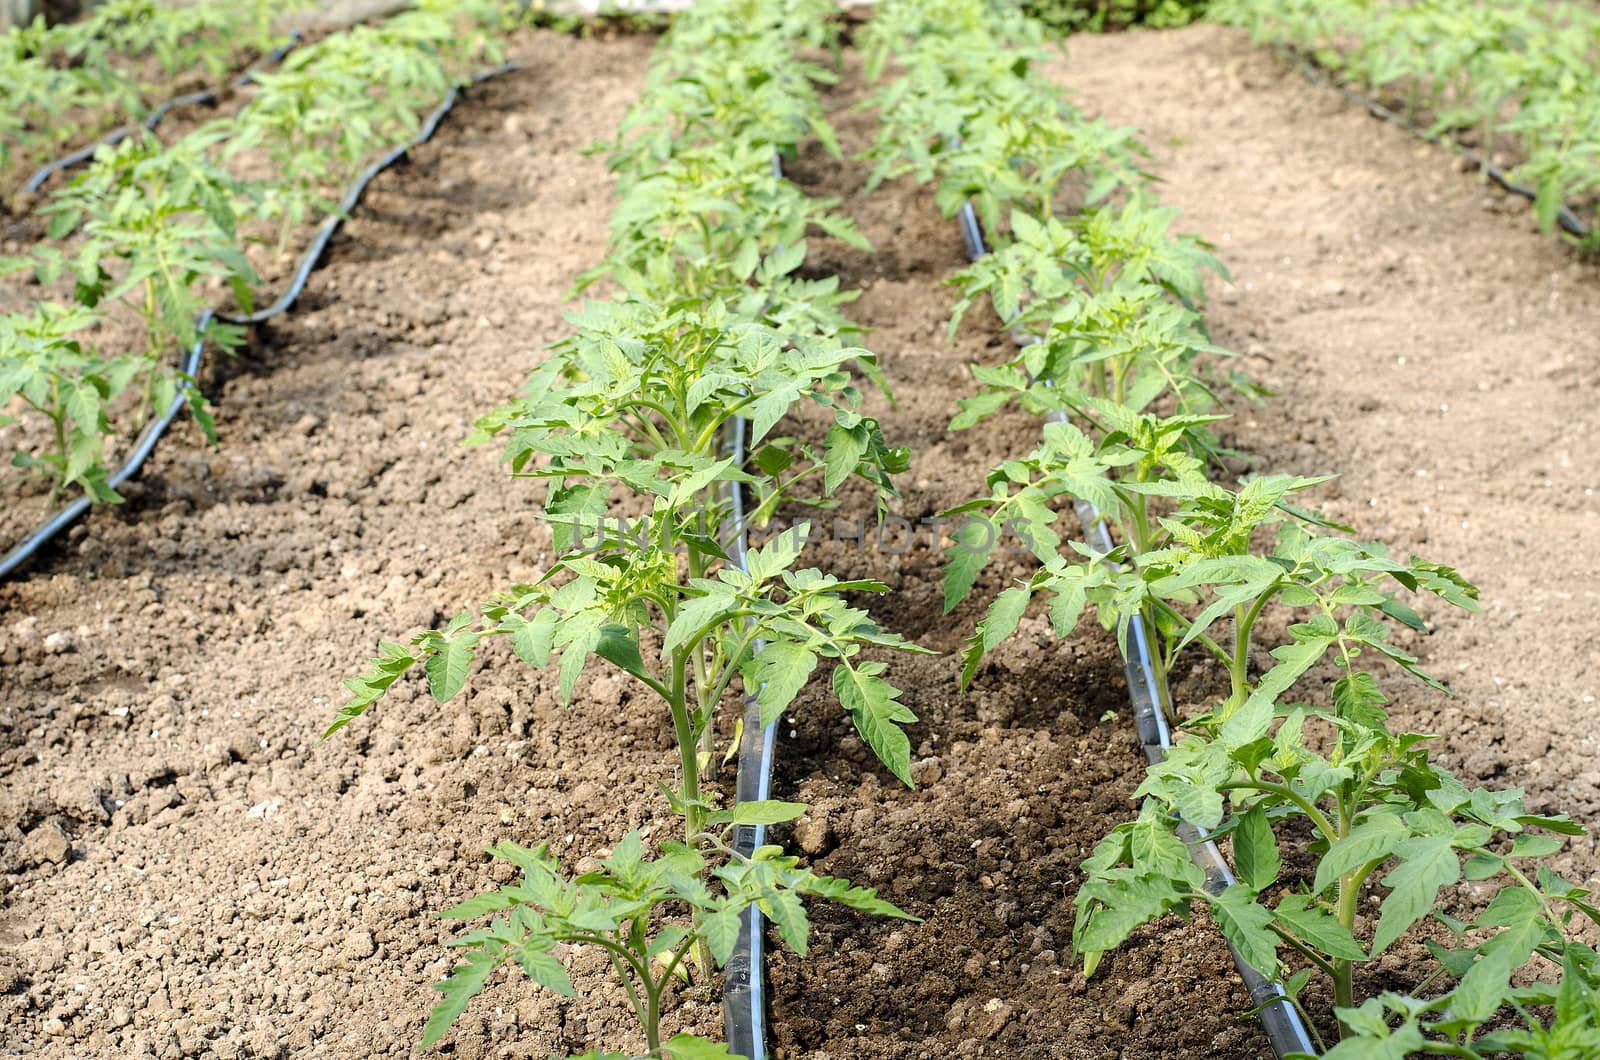 Newly planted tomato shoots in greenhouse by eenevski